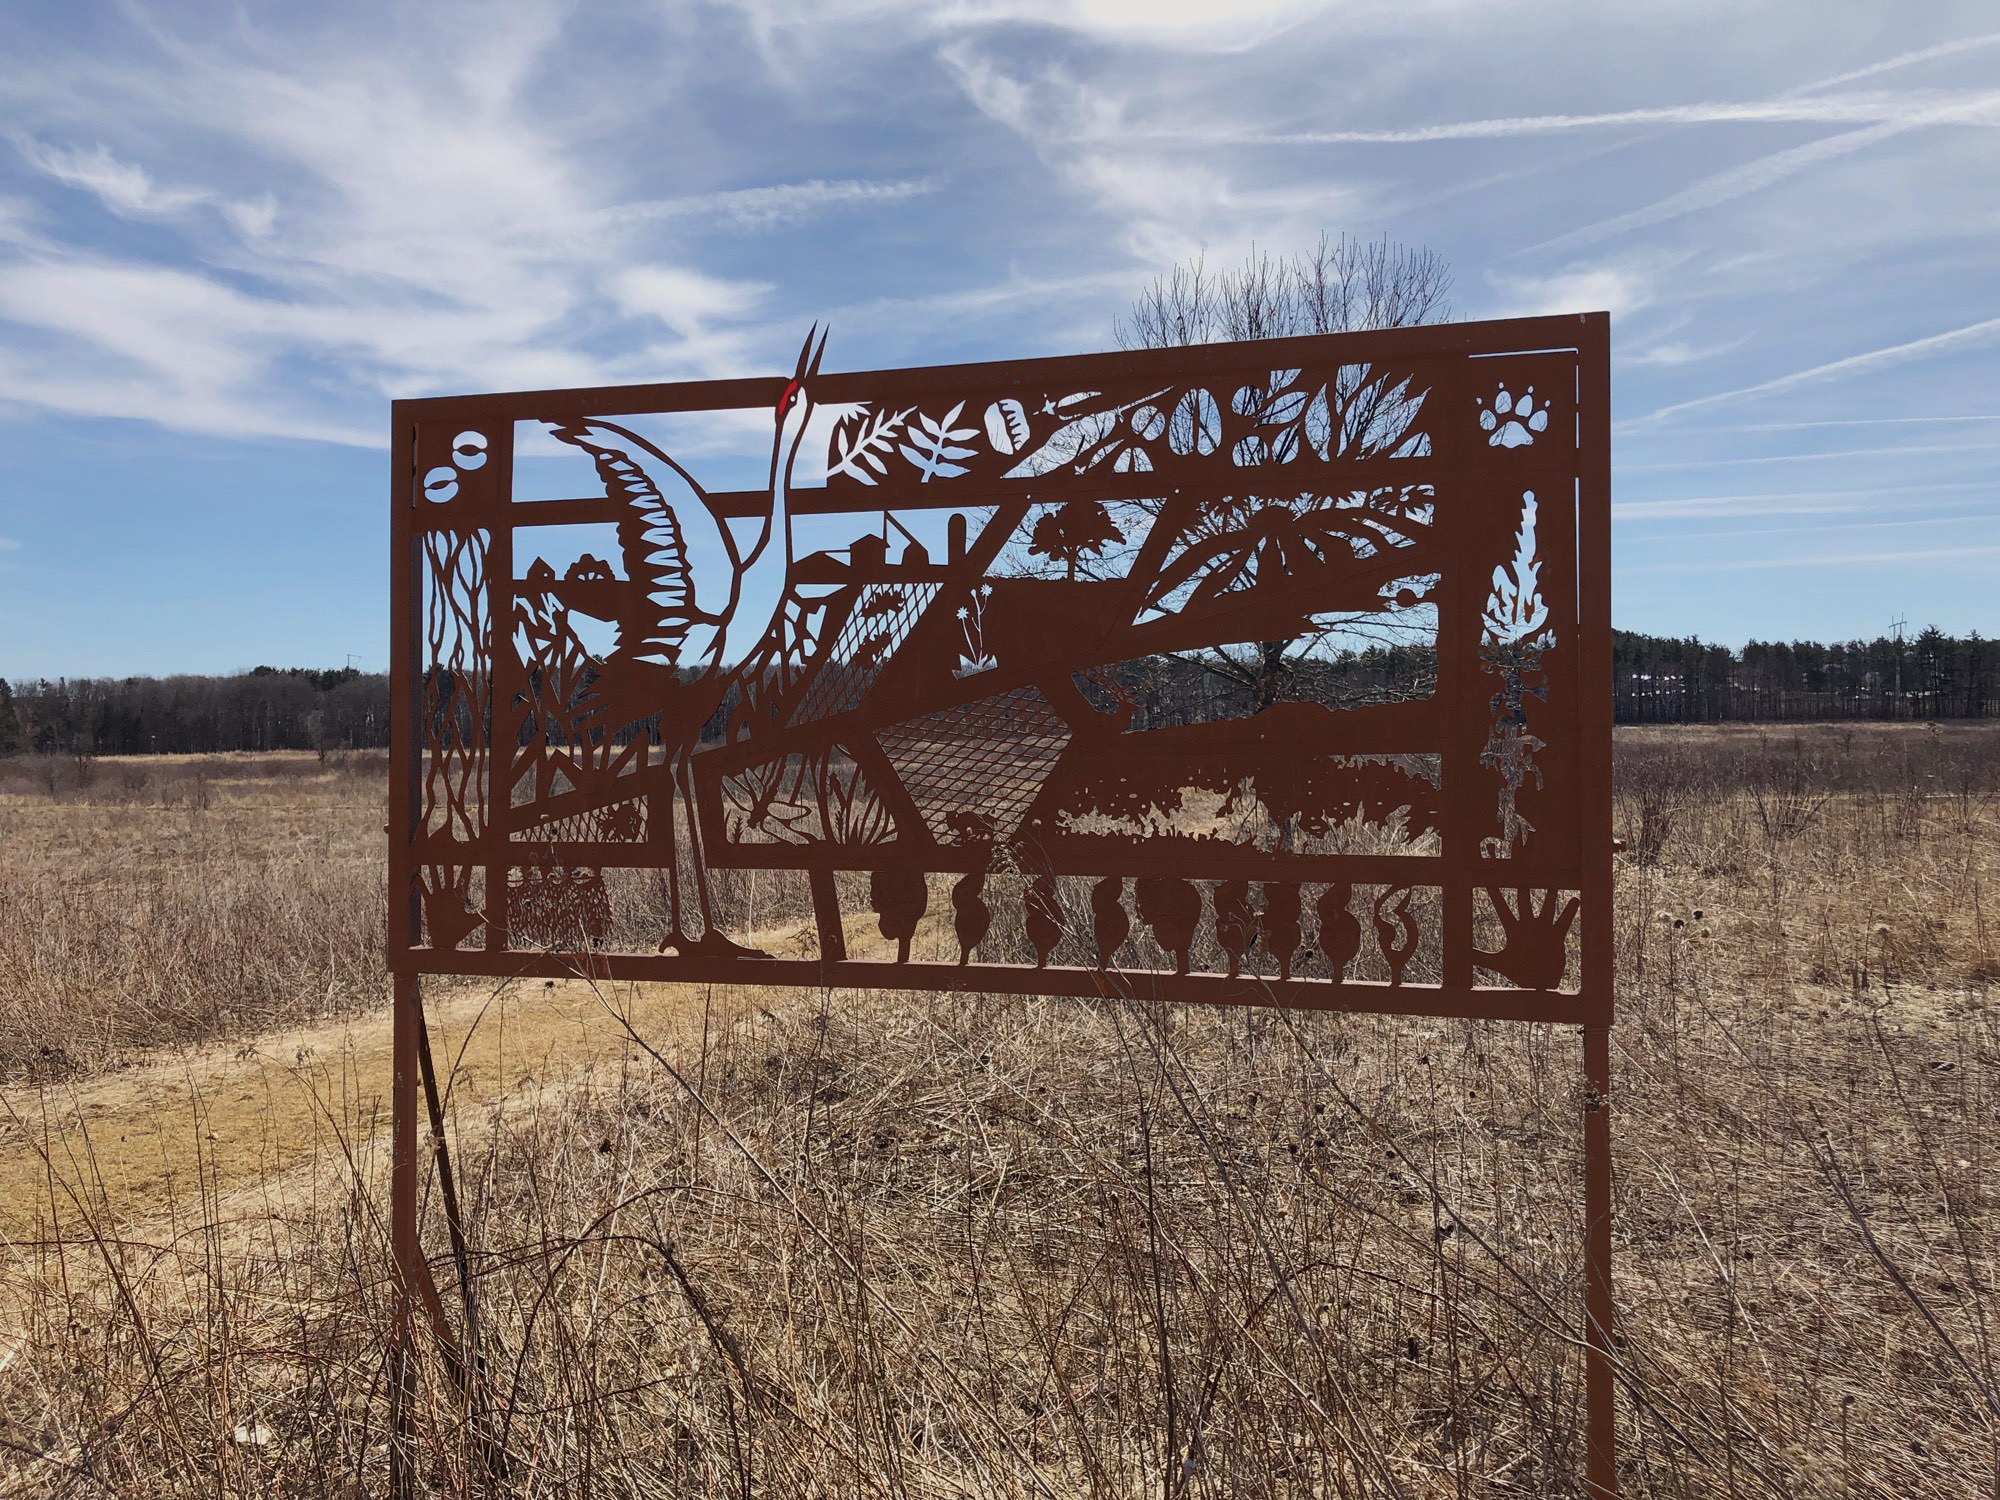 Curtis Prairie metal sign in the University of Wisconsin Arboretum in Madison, Wisconsin on March 26, 2019.